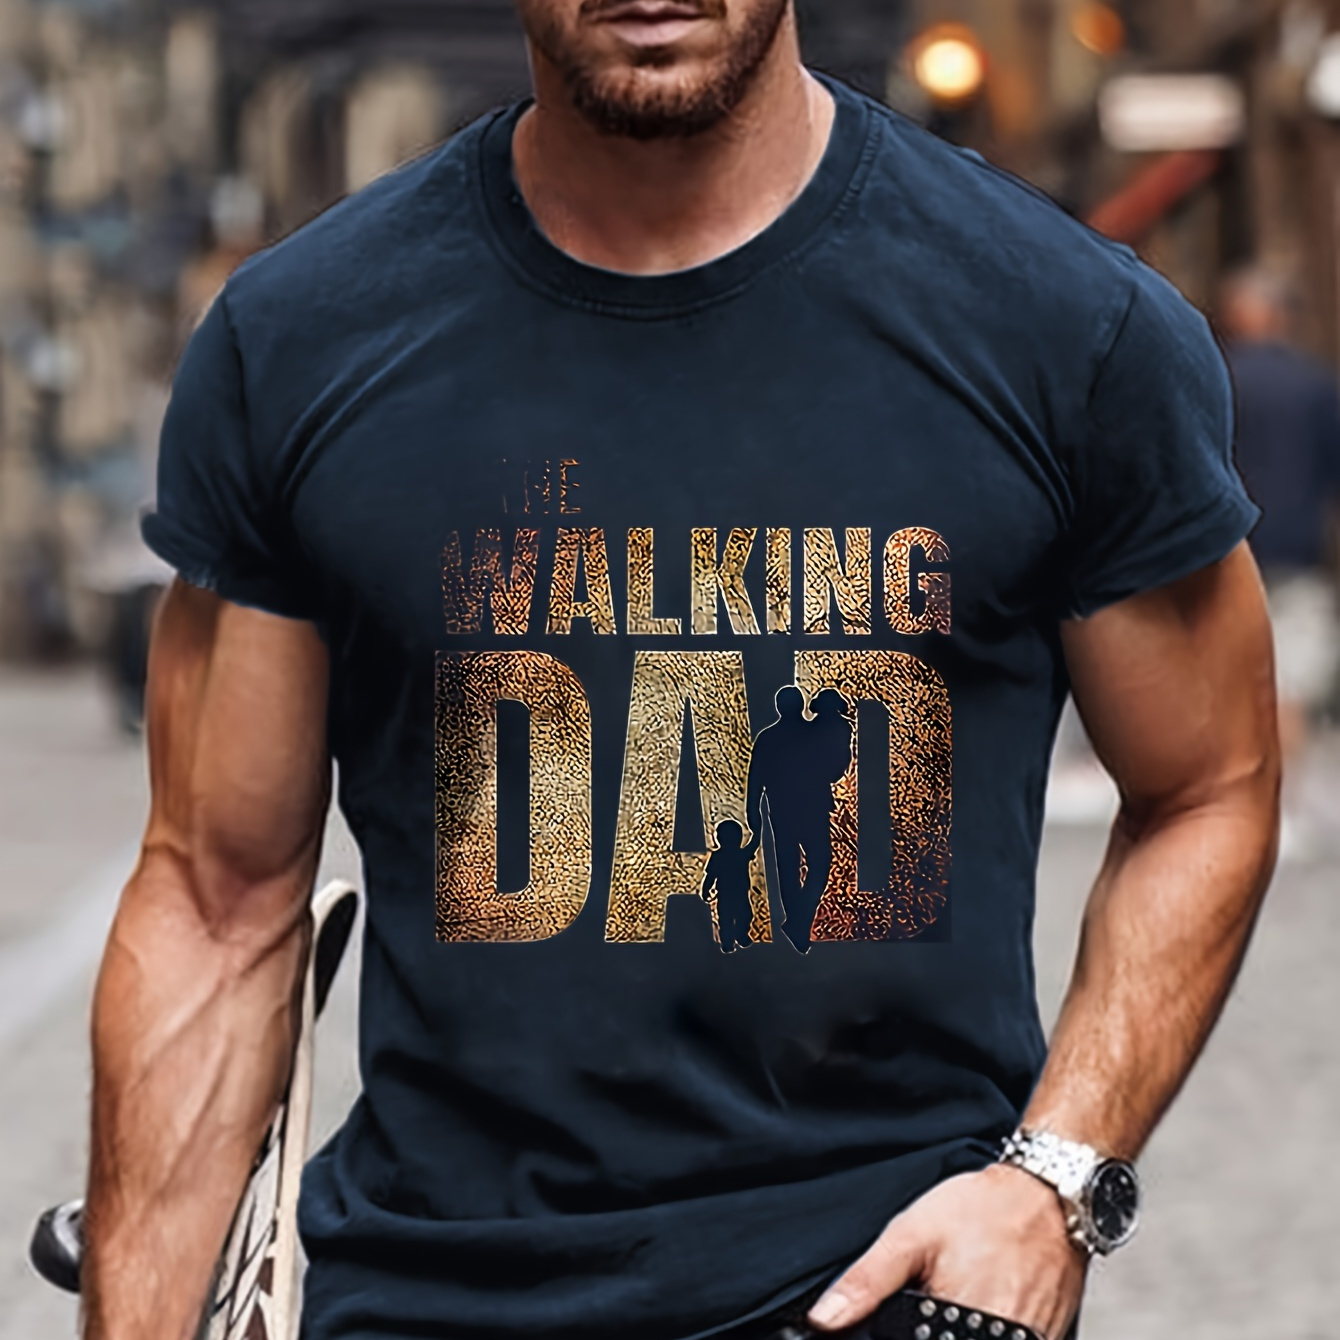 

Dad Print, Men's Graphic Design Crew Neck T-shirt, Casual Comfy Tees Tshirts For Summer, Men's Clothing Tops For Daily Vacation Resorts